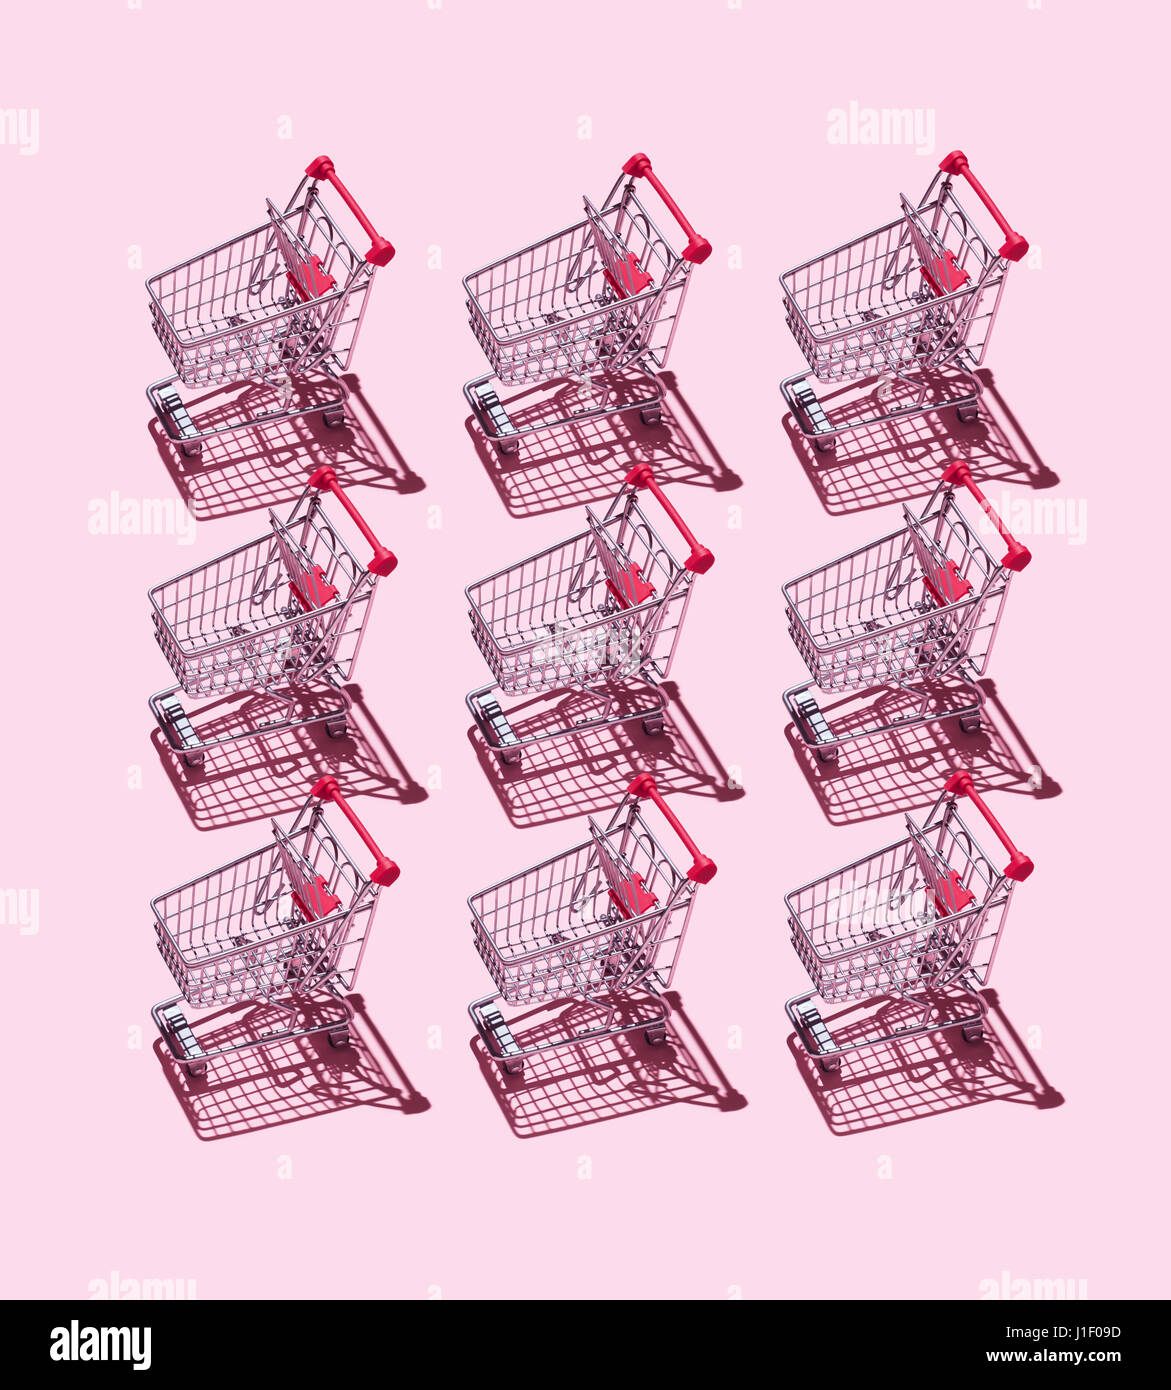 Multiple Shopping Carts organized over pink background Stock Photo